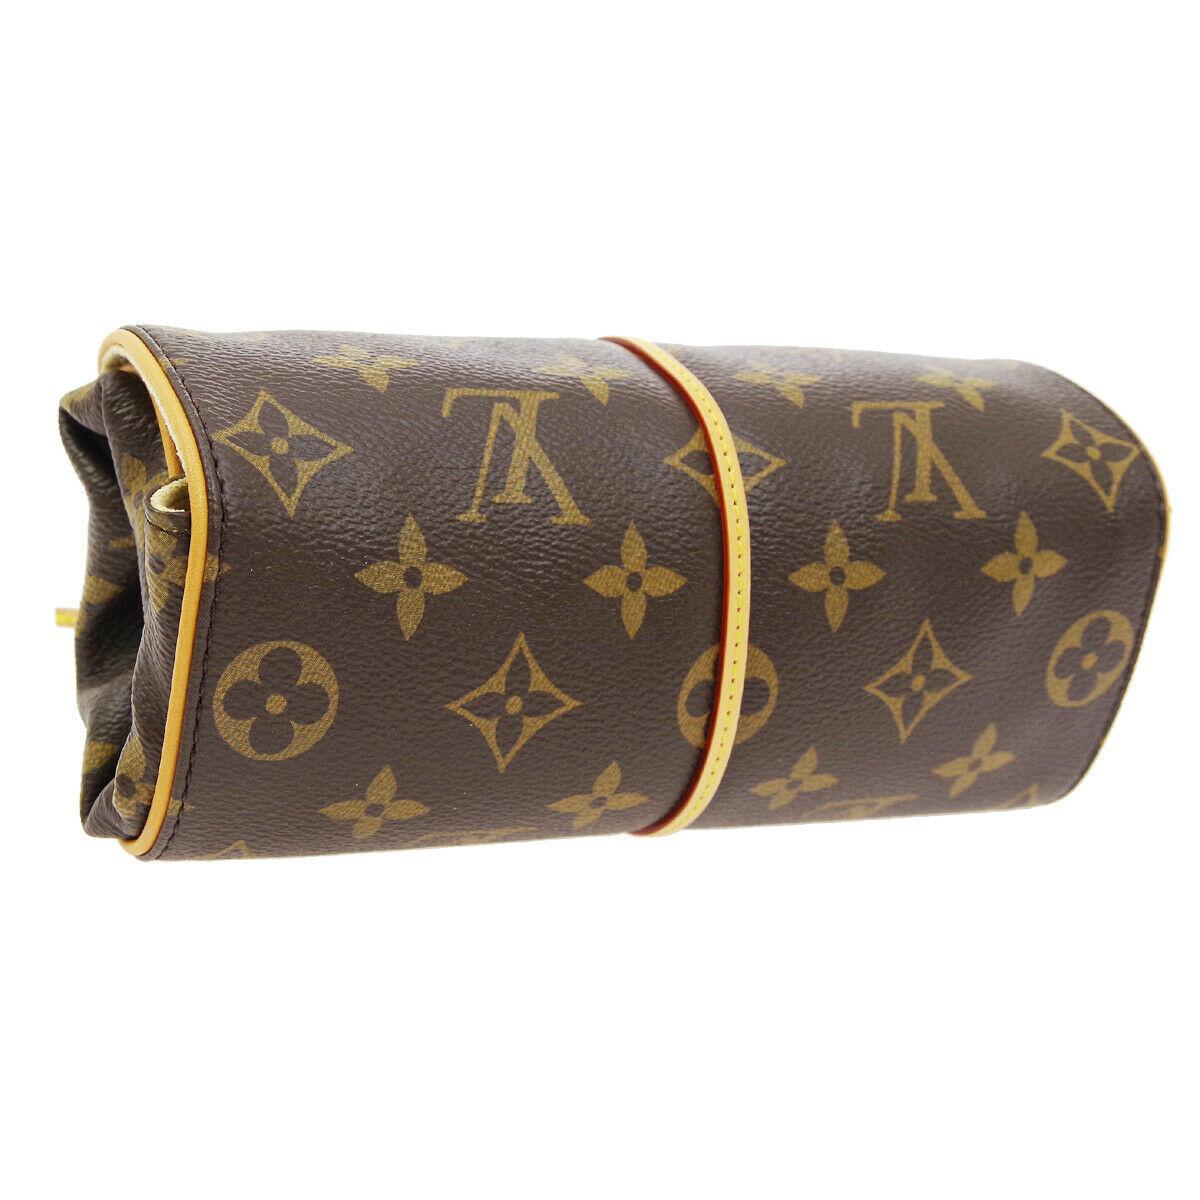 
Monogram canvas
Leather 
Gold tone hardware 
Velvet lining
Tie closure
Date code present
Made in France
Measures 8